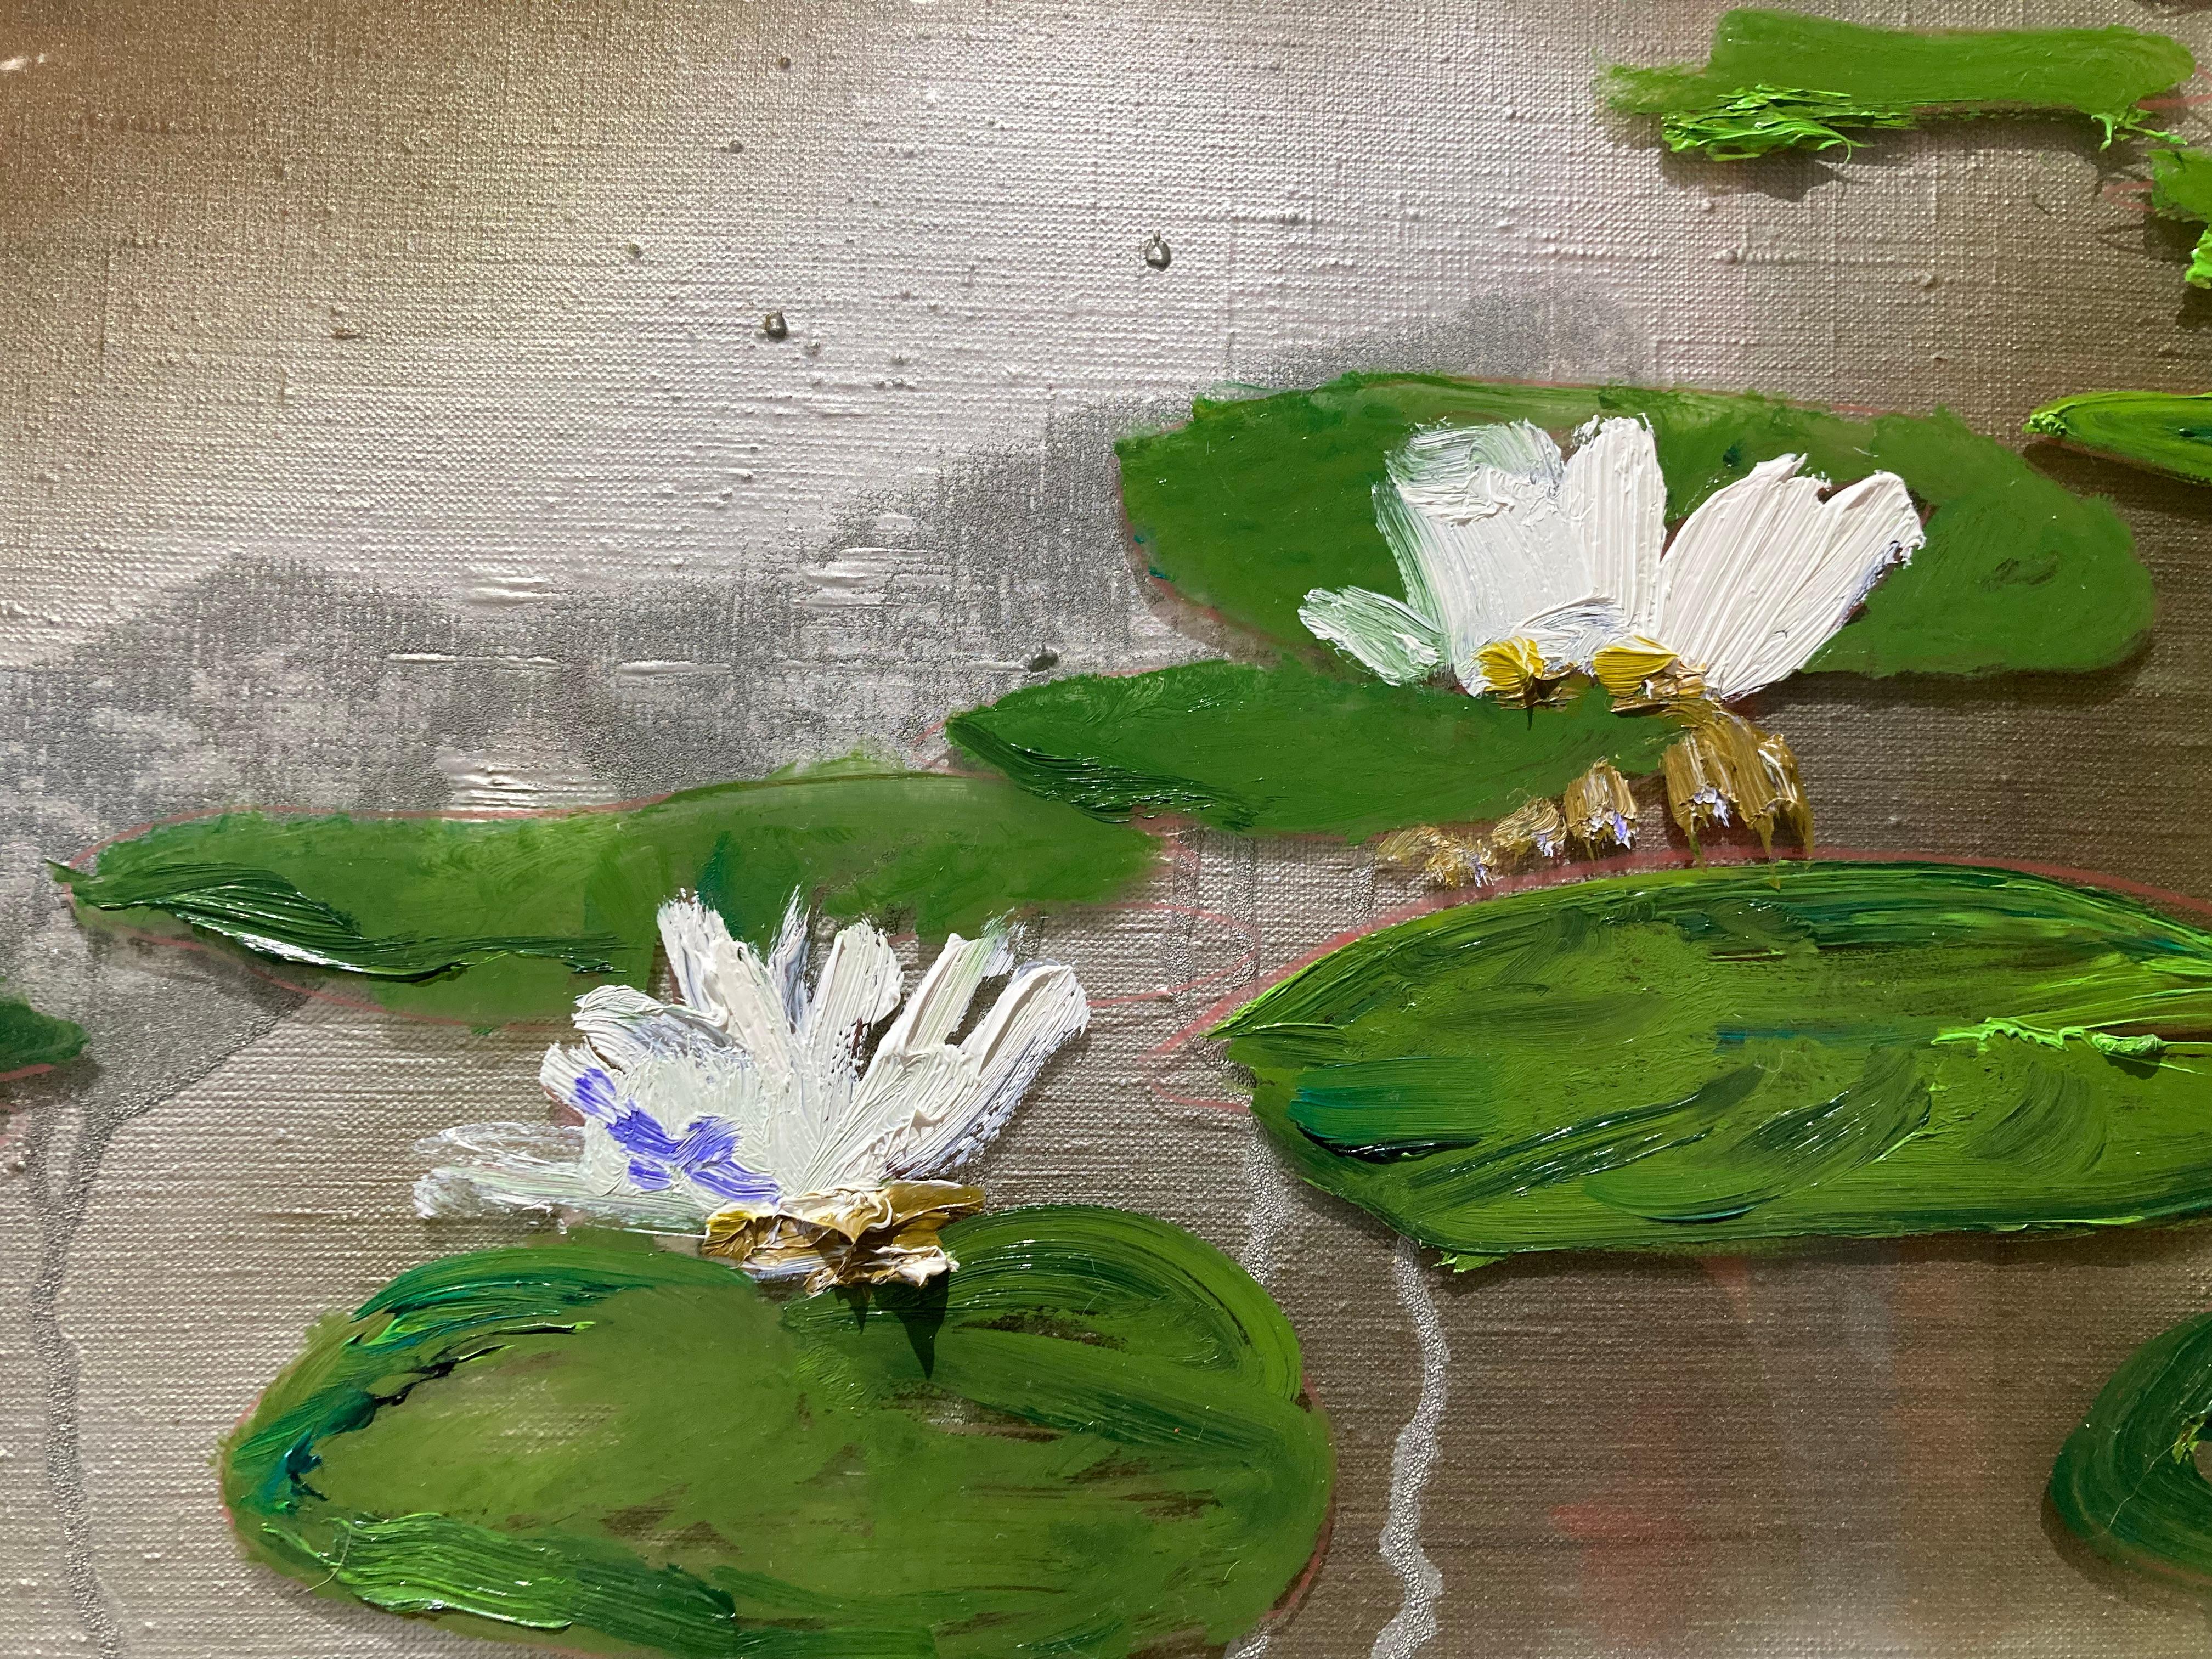 Abstract expressionist painting of a lily pond. This painting is a continuation of Yektai's Silver Pond series, but instead of using his usual oversized canvas, Yektai created a silver pond in a more accessible format without compromising the